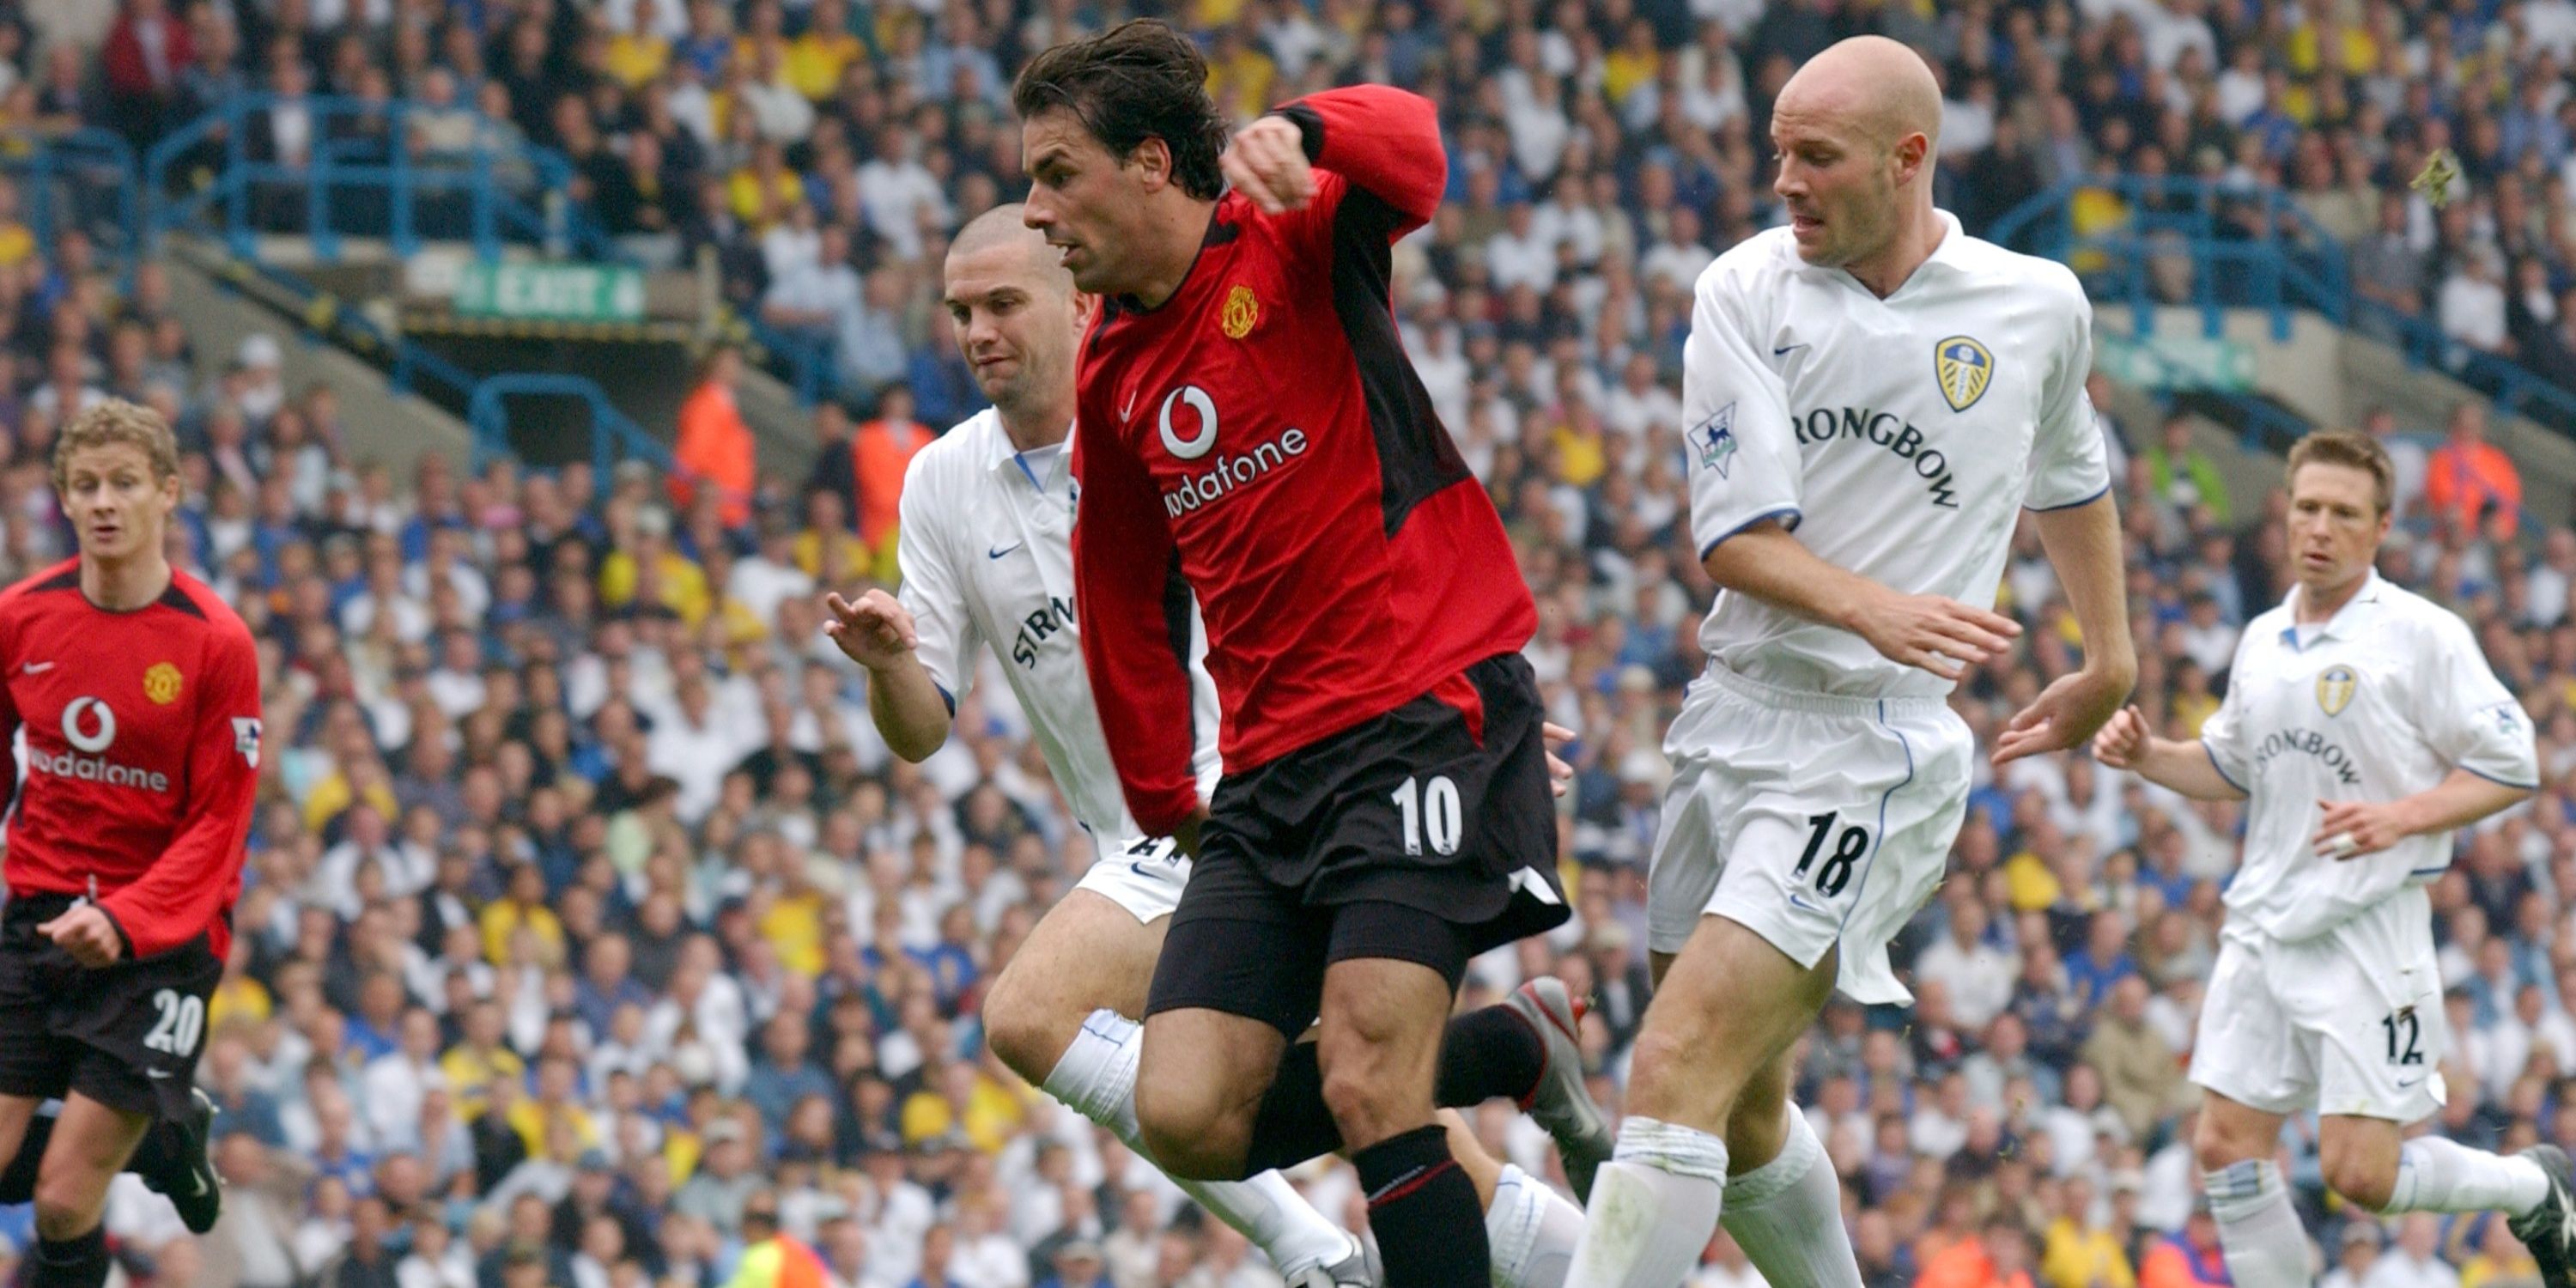 alan-smith-leeds-united-ruud-van-nistelrooy-manchester-united-transfer-1